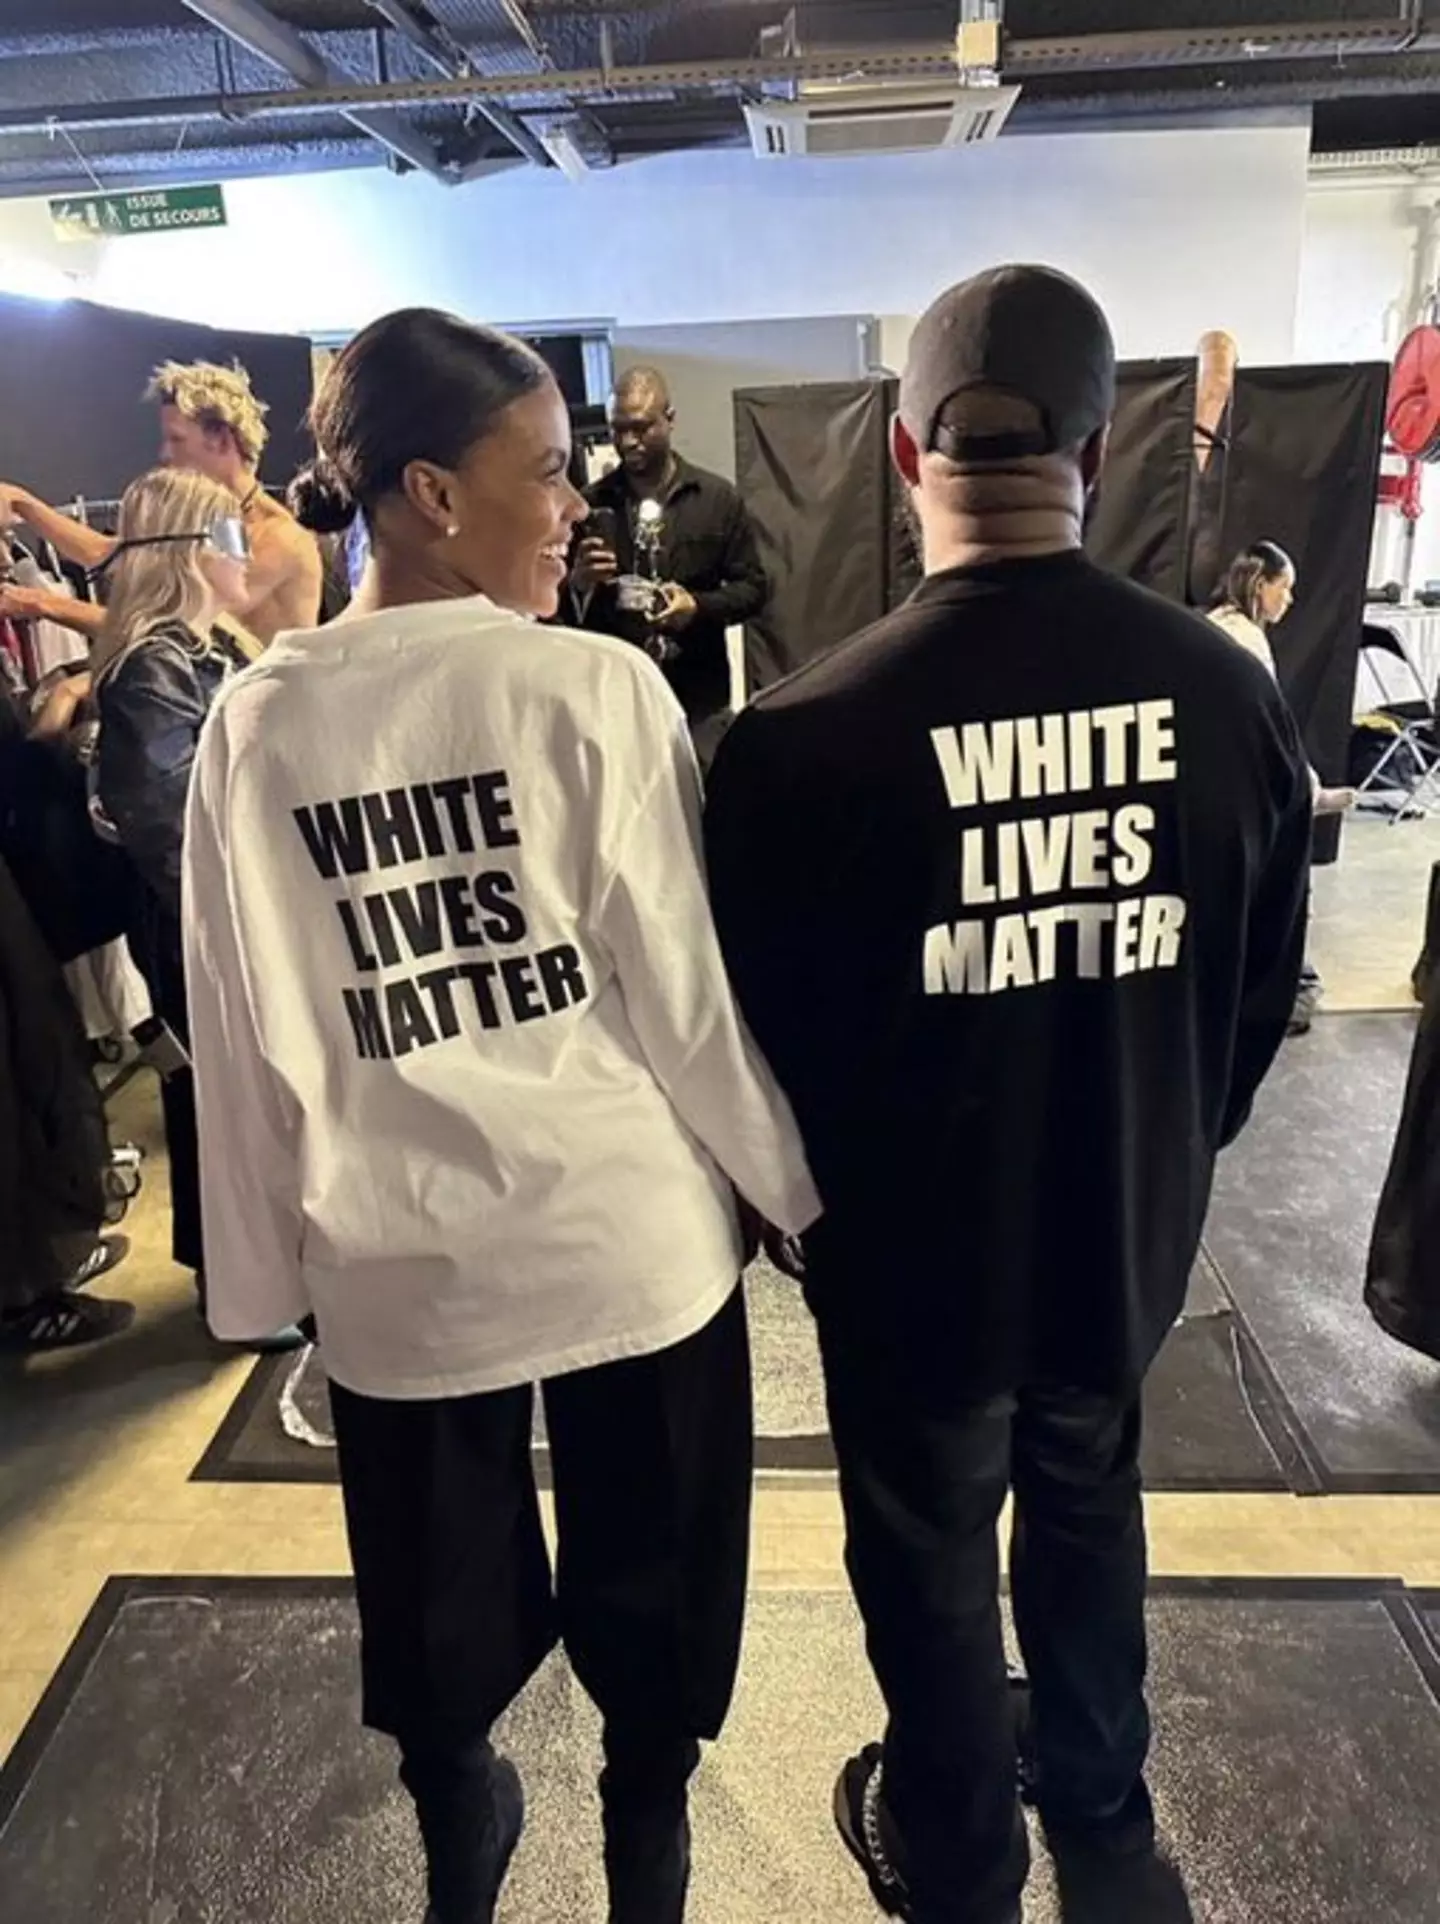 West debuted the controversial White Lives Matter t-shirts at Paris Fashion Week.